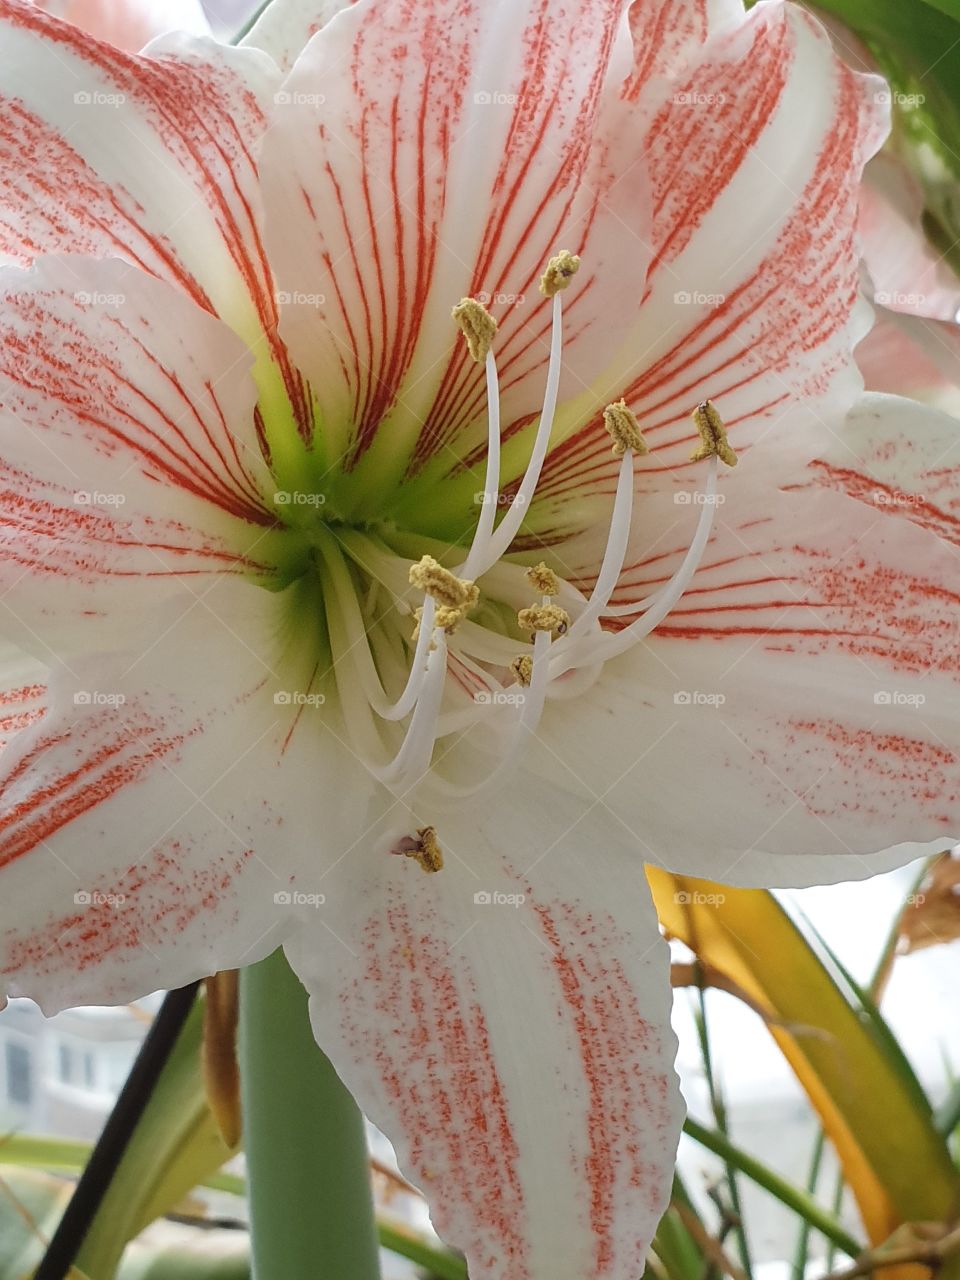 white and red stripped amaryllis closeup